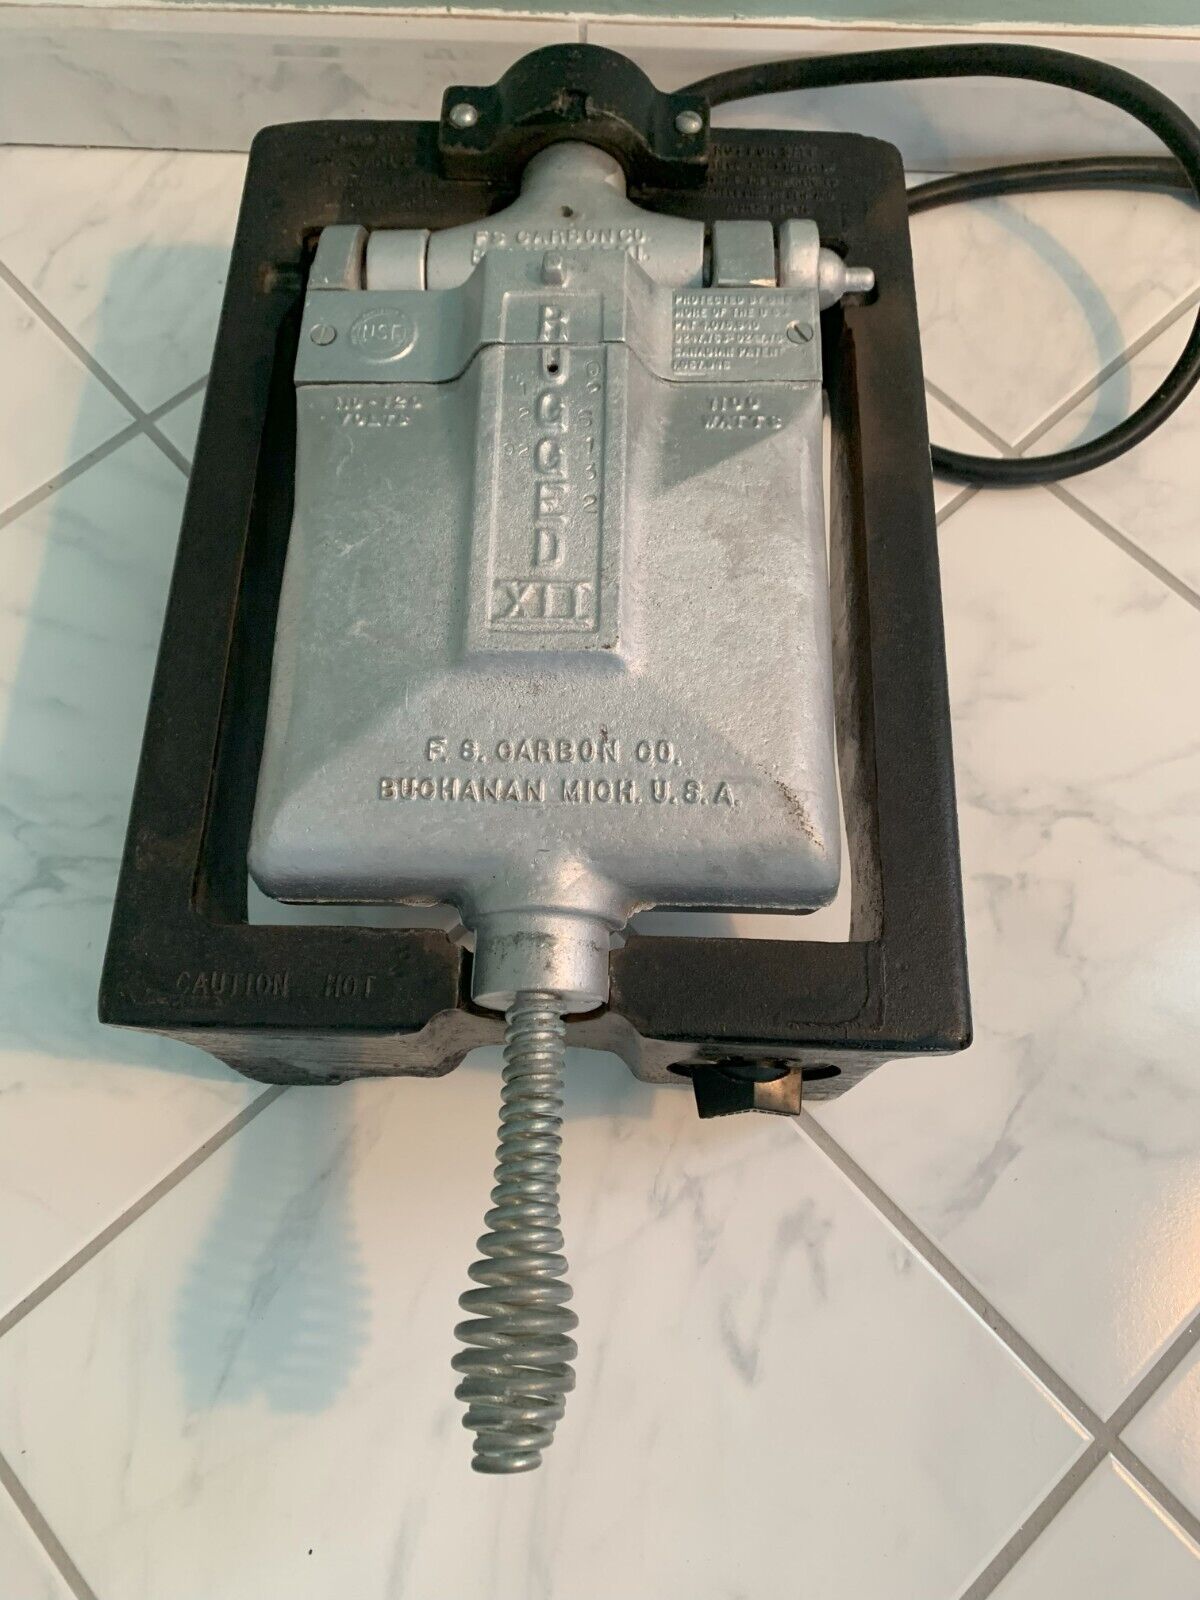 Vintage F. S. Carbon Co. Rugged XII Waffle Maker